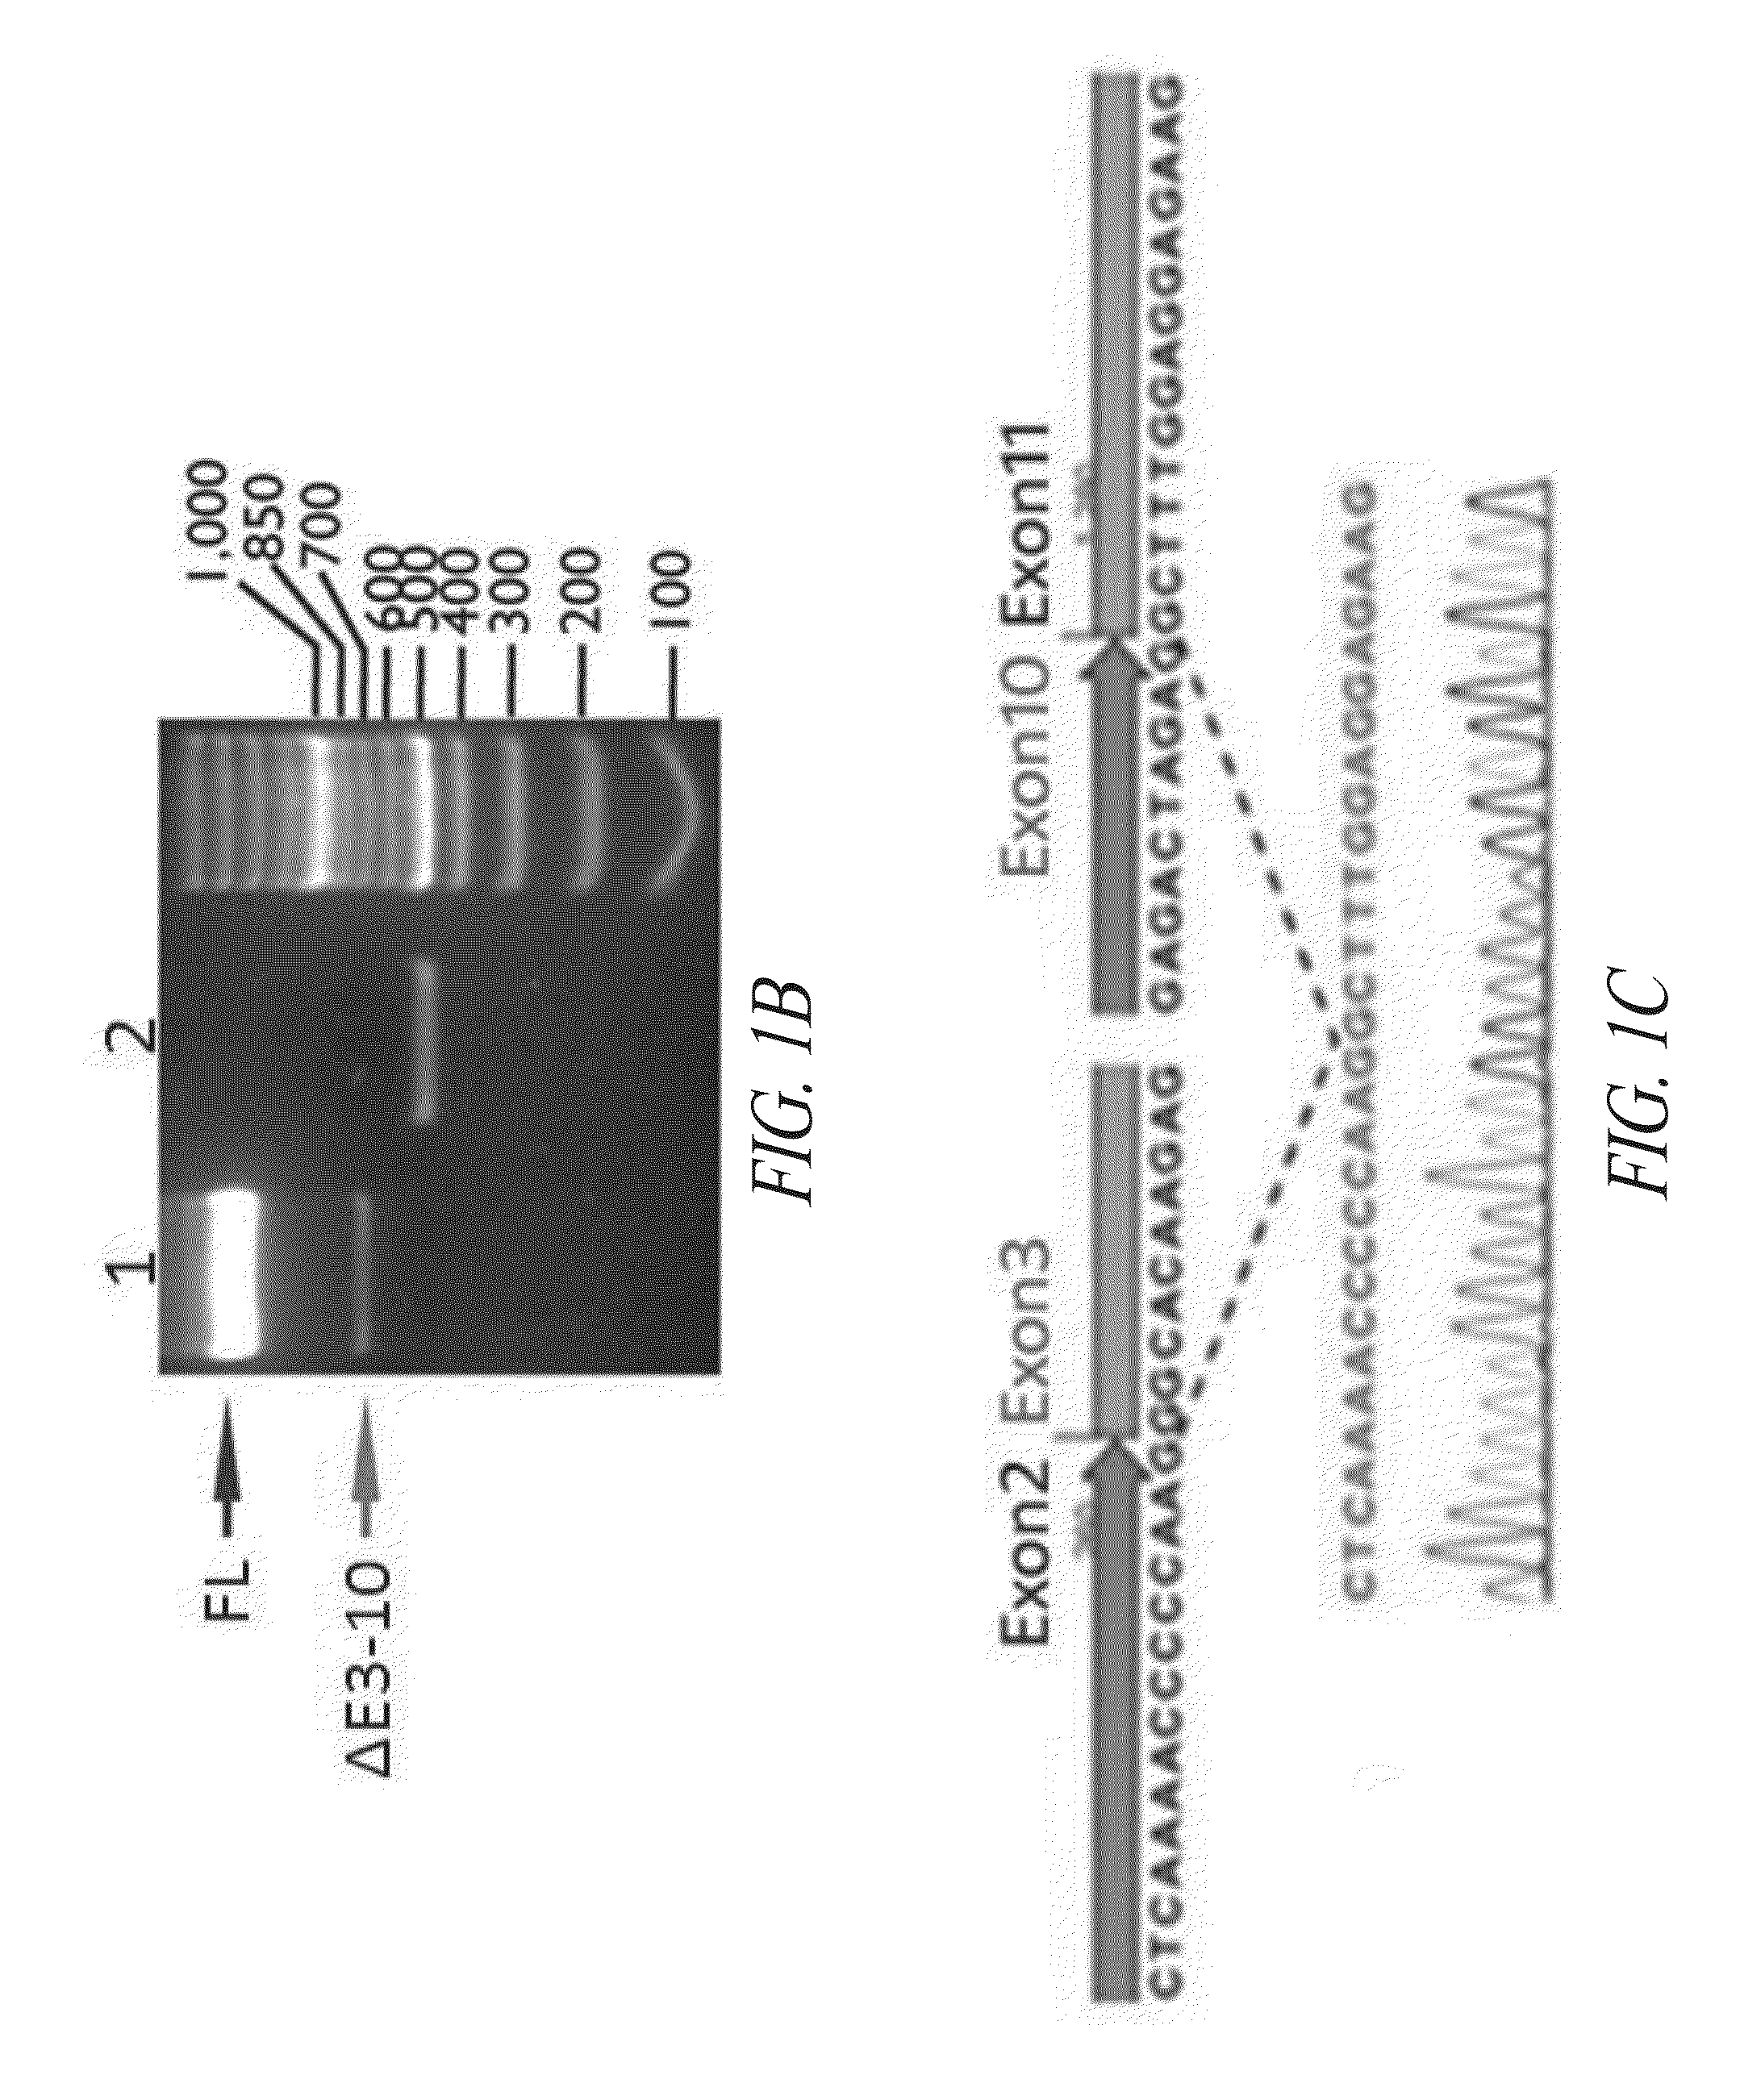 Structures of human histidyl-trna synthetase and methods of use